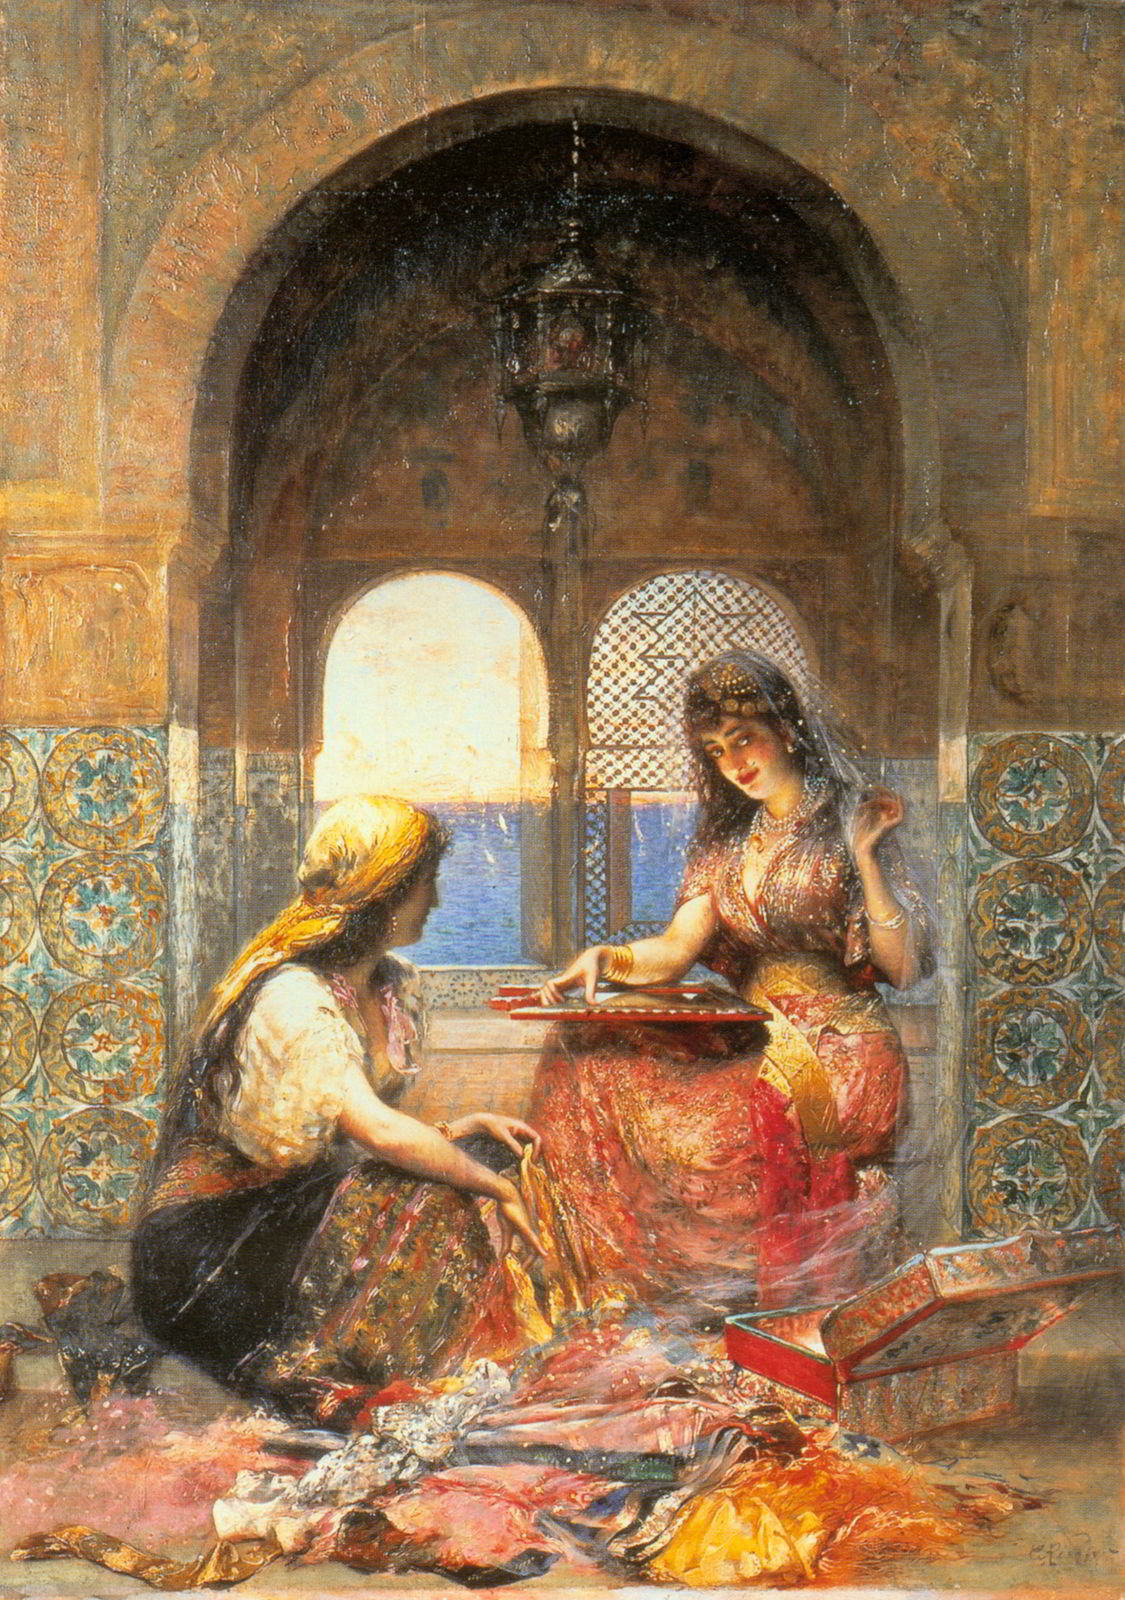 The Final Decision by Edouard Frederic Wilhelm Richter